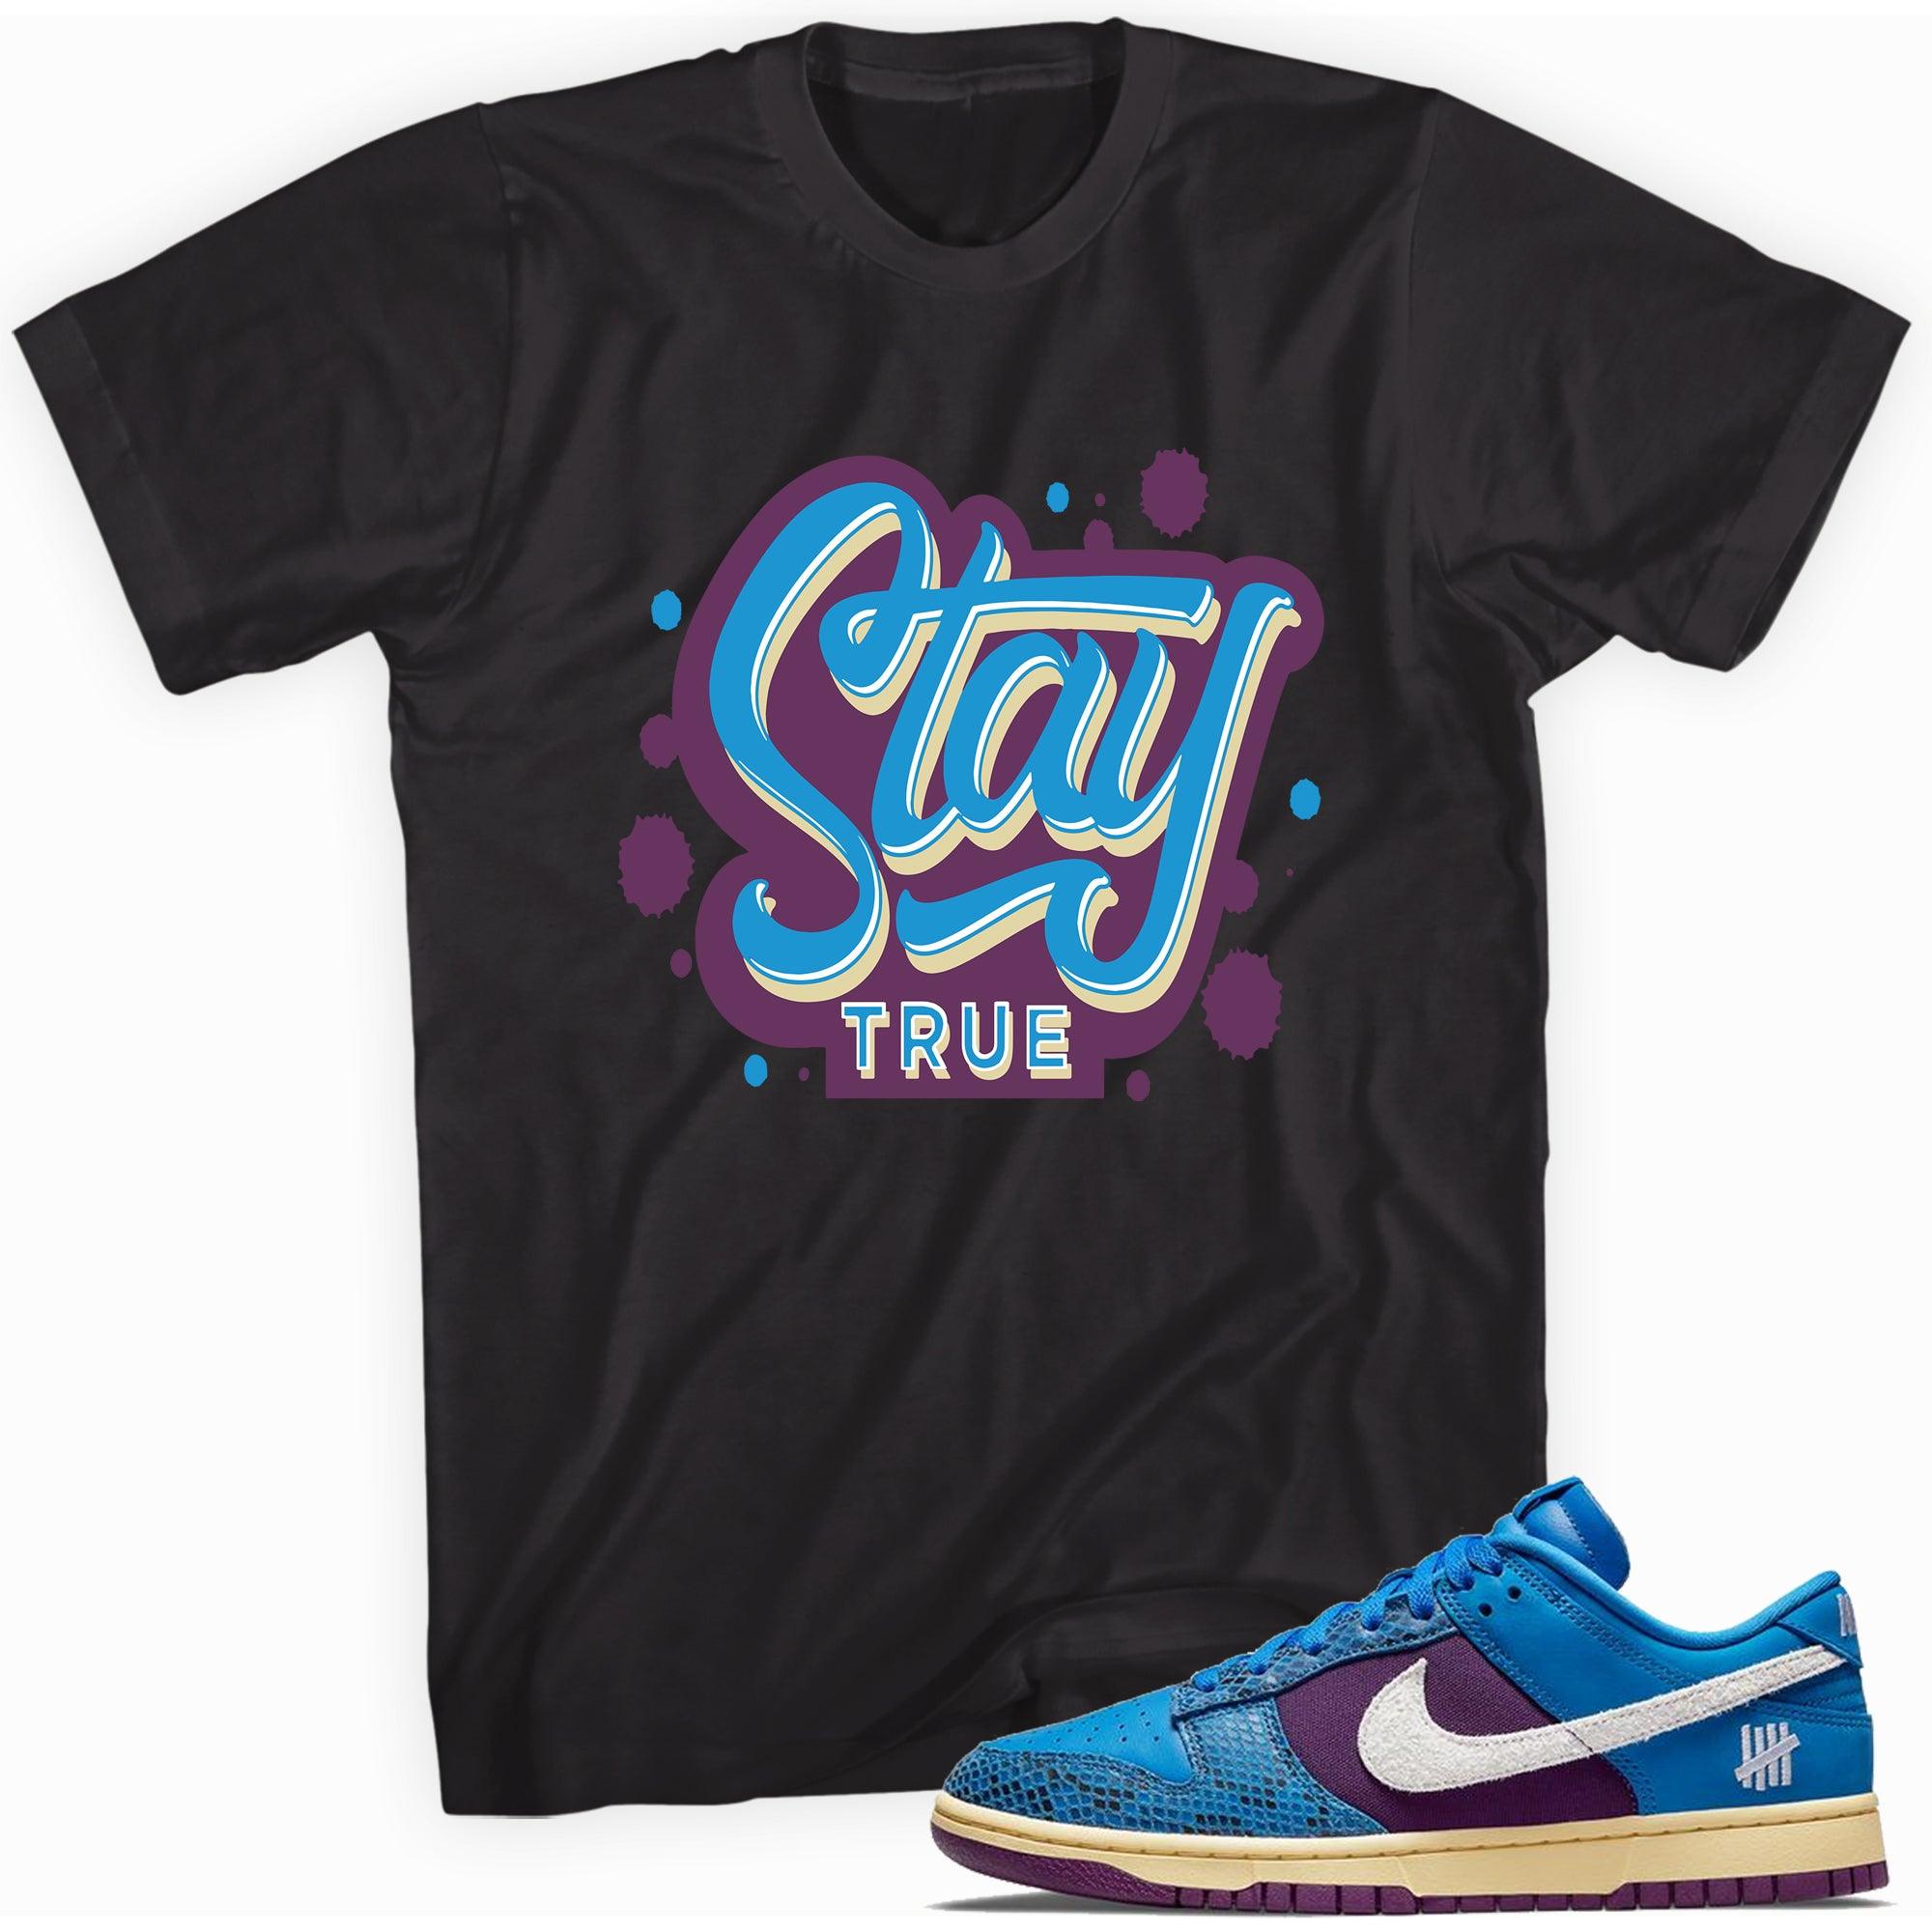 Stay True Shirt Nike Dunk Low Undefeated 5 On It Dunk vs AF1 photo